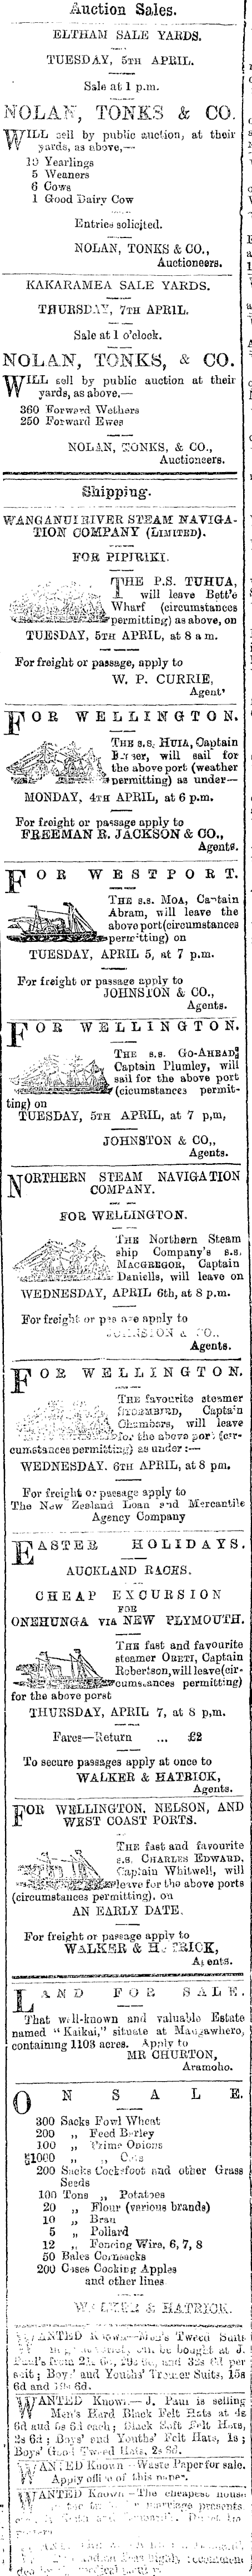 Papers Past Newspapers Wanganui Chronicle 4 April 17 Page 3 Advertisements Column 6